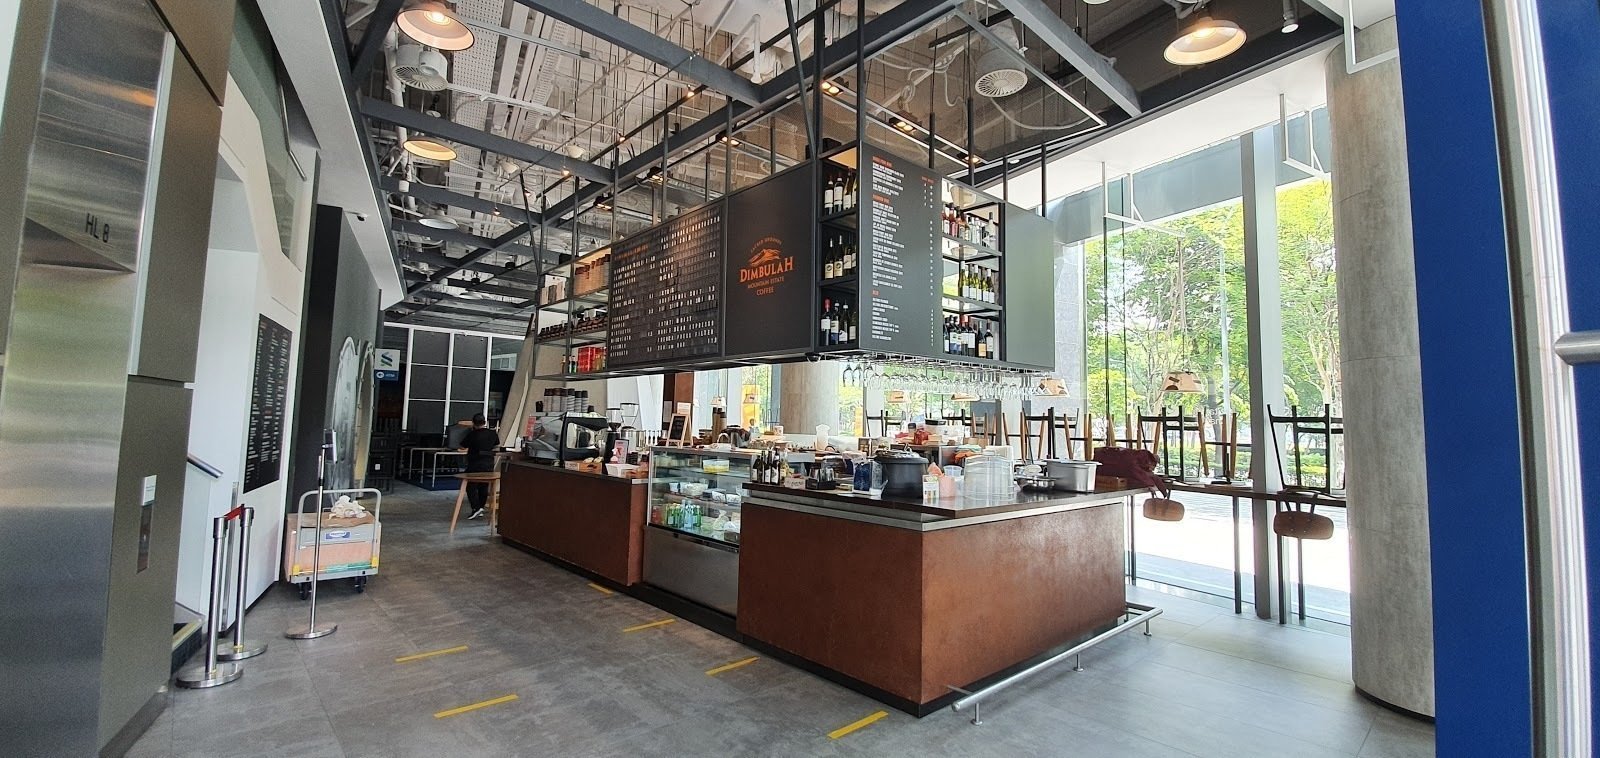 <span class="translation_missing" title="translation missing: en.meta.location_title, location_name: Dimbulah Coffee @ MBFC Tower 1, city: Singapore">Location Title</span>